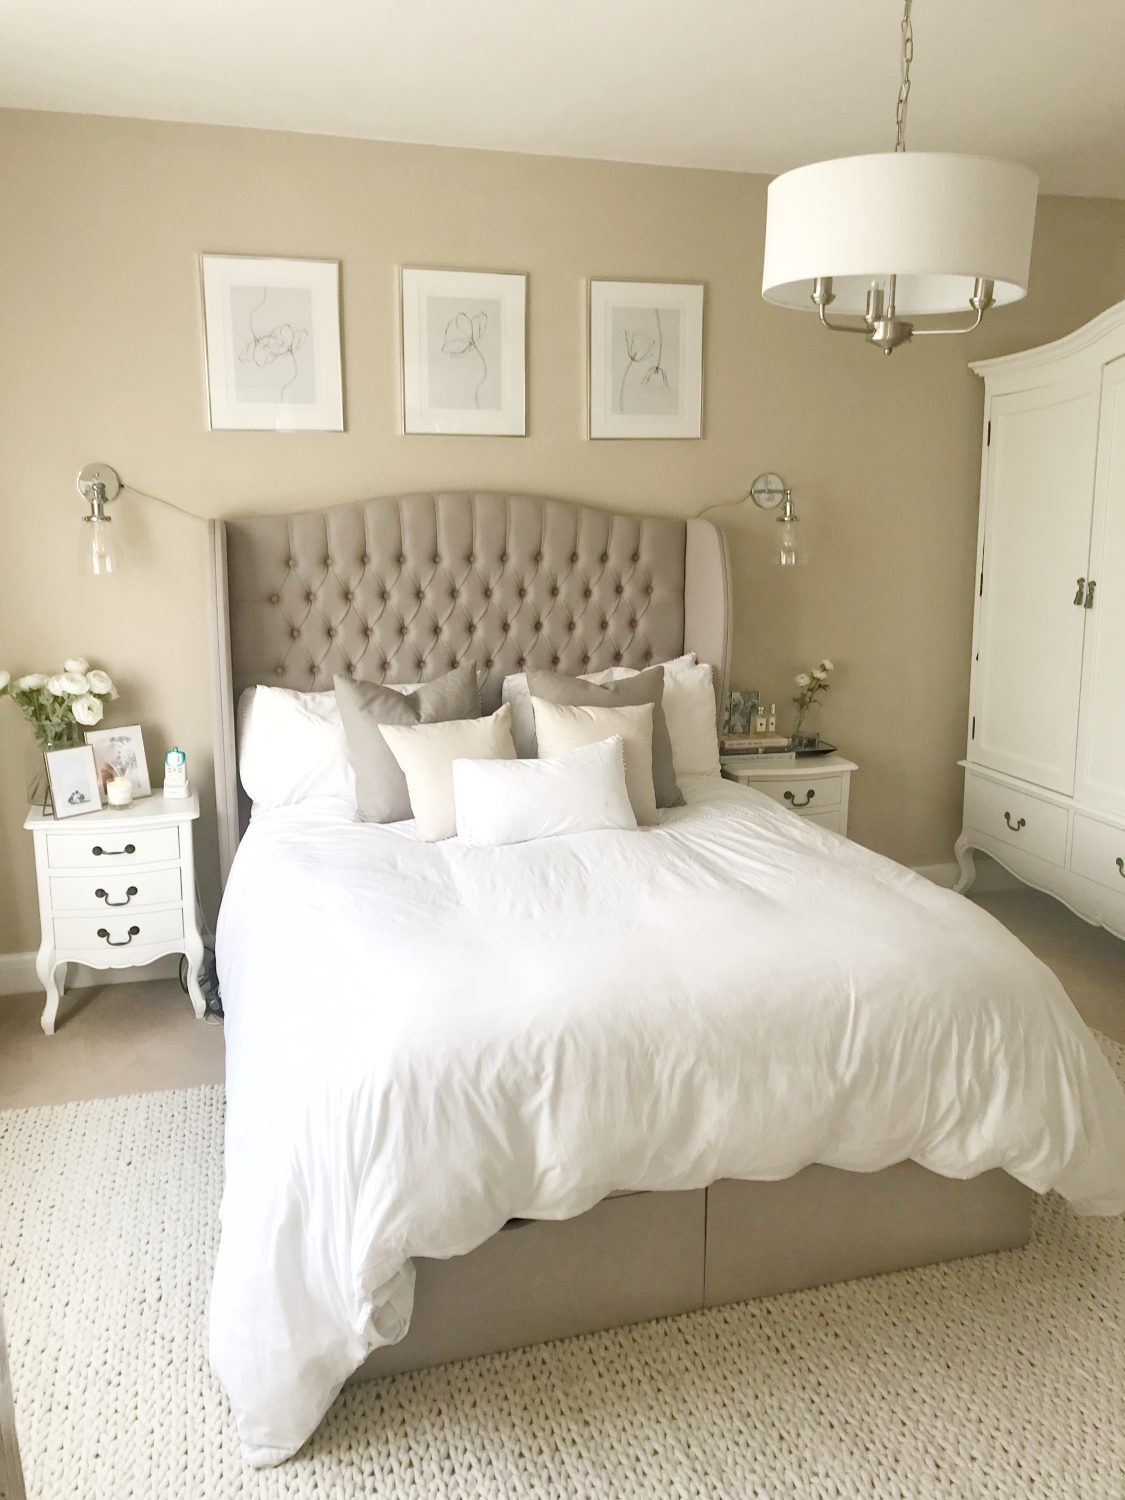 Home Tour Friday – Master Bedroom – The Home That Made Me